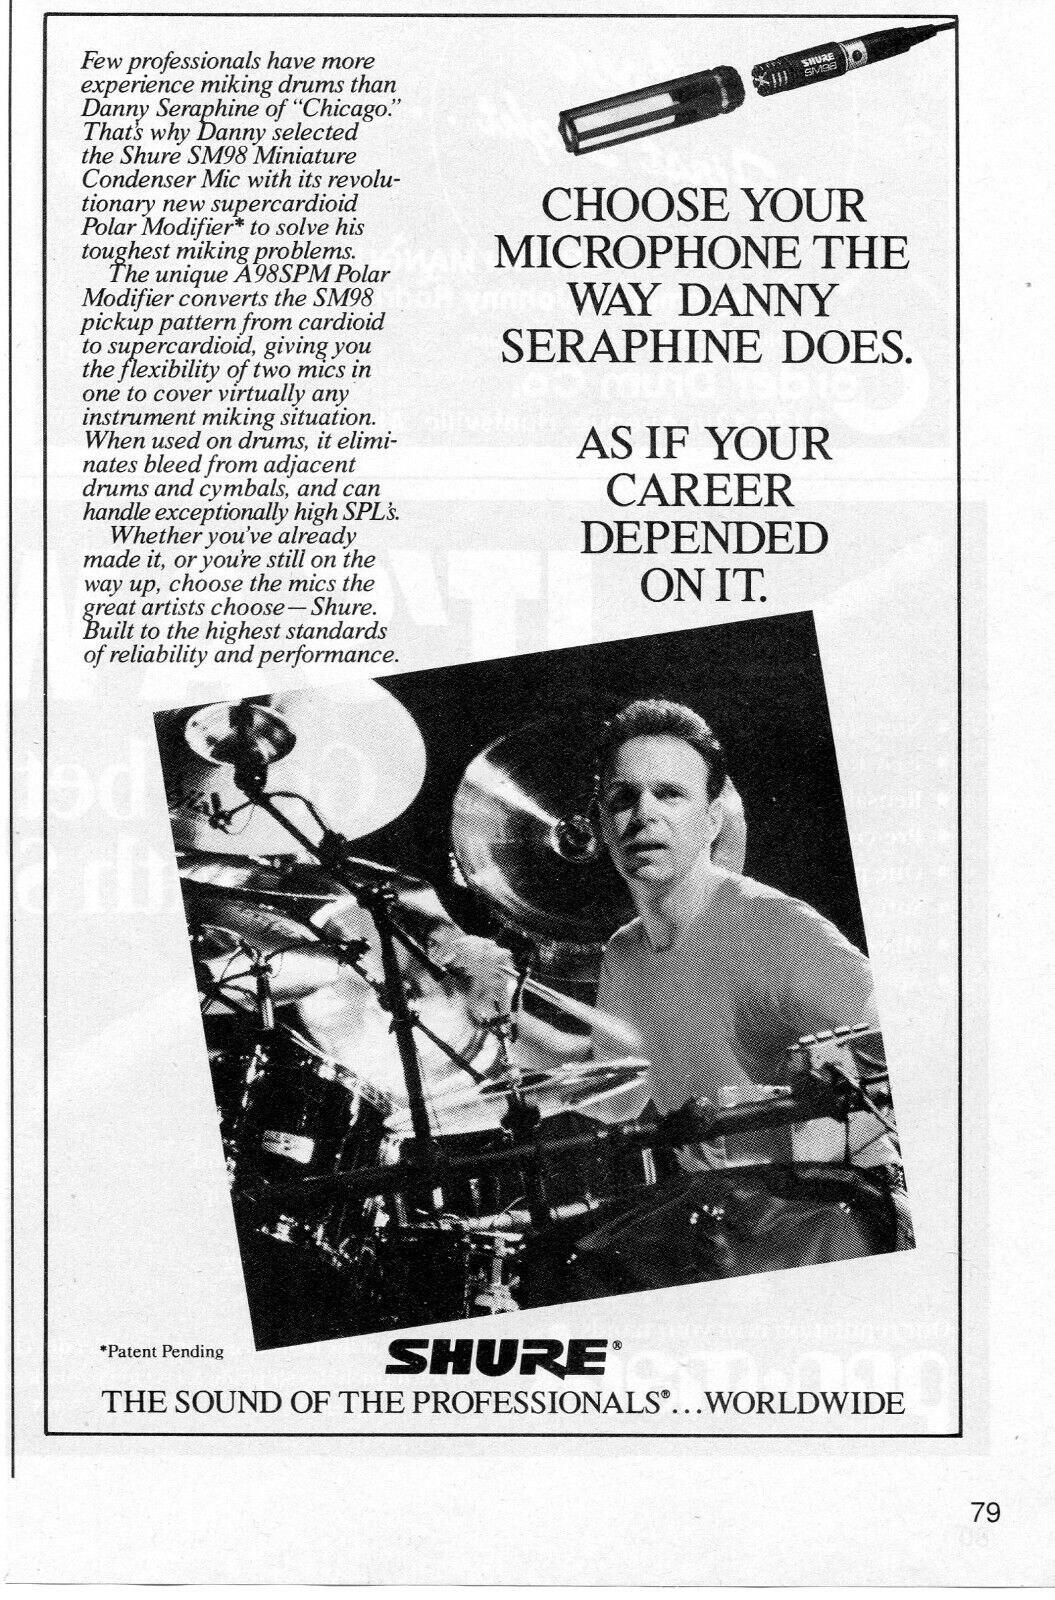 1989 small Print Ad of Shure Drum Microphones w Danny Seraphine of Chicago